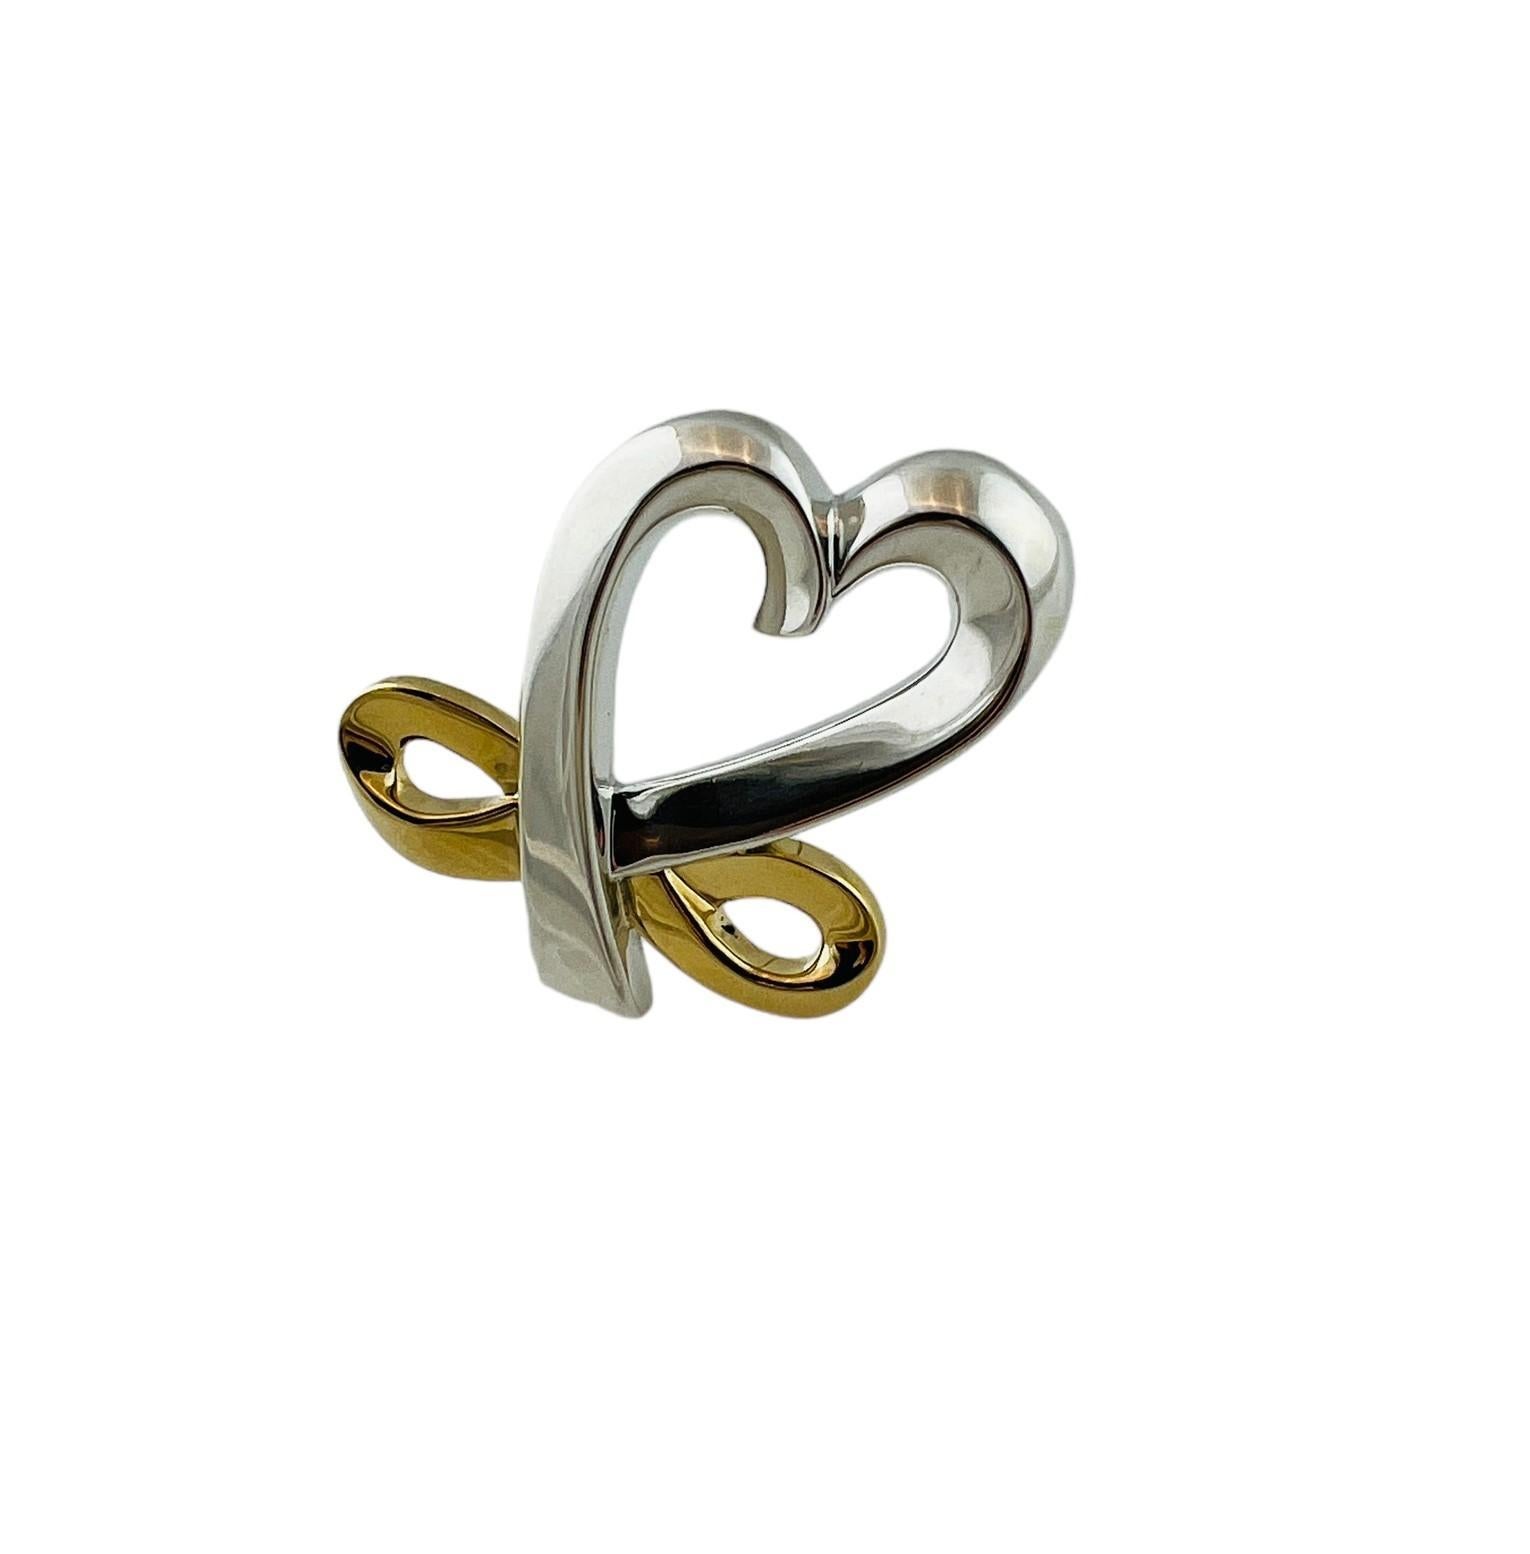 Tiffany & Co. Pablo Picasso 18K Yellow Gold and Sterling Silver Open Heart Infinity Brooch

This vintage Tiffany & Co. Pin was designed by Pablo Picasso

Approx. 1 1/2